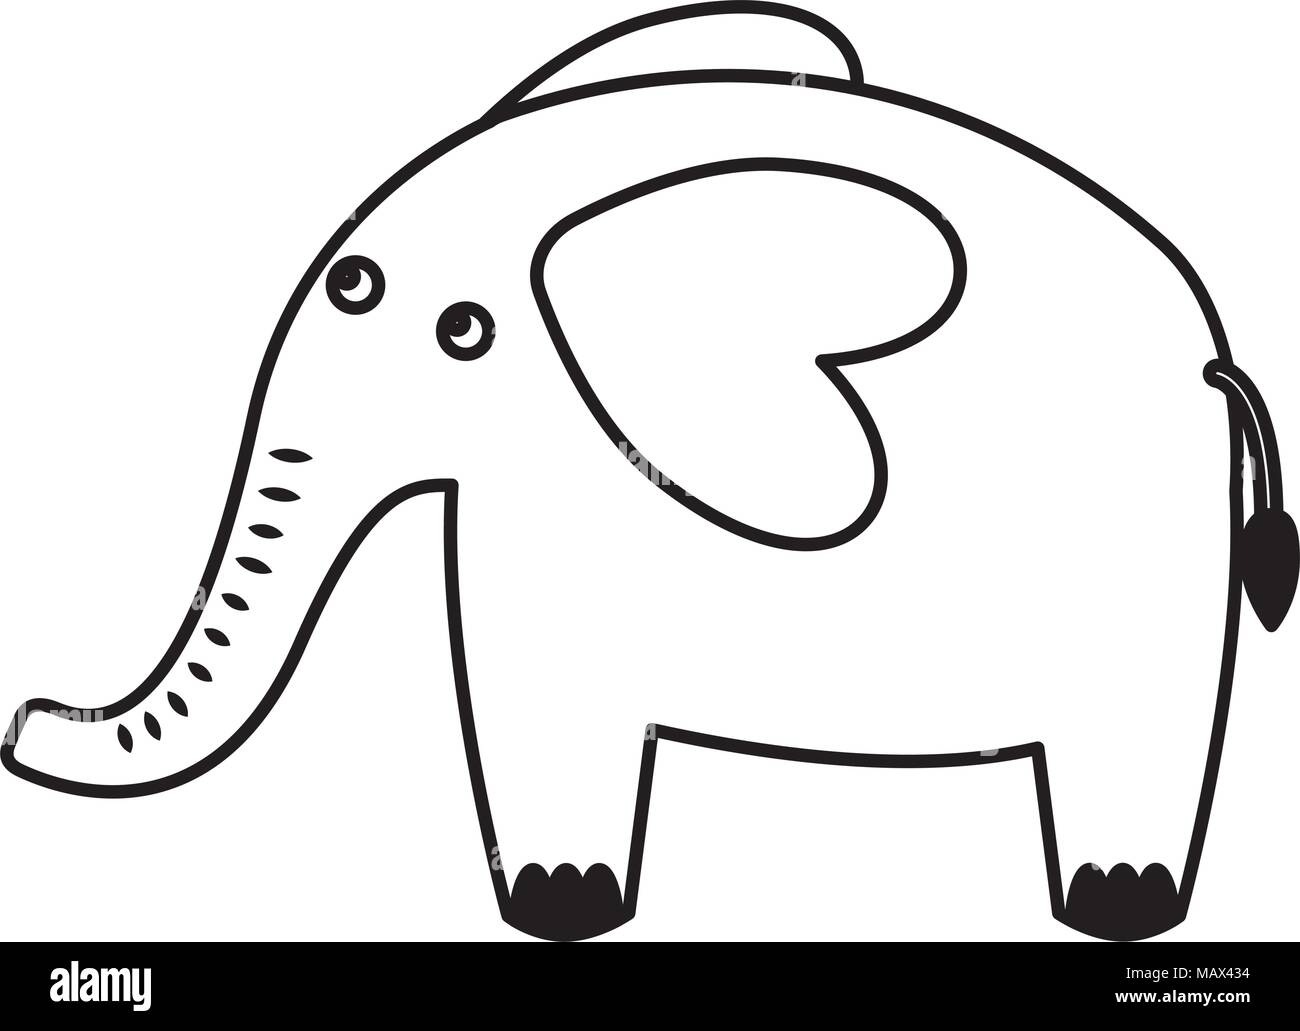 cute elephant african animal image vector illustration black and white Stock Vector